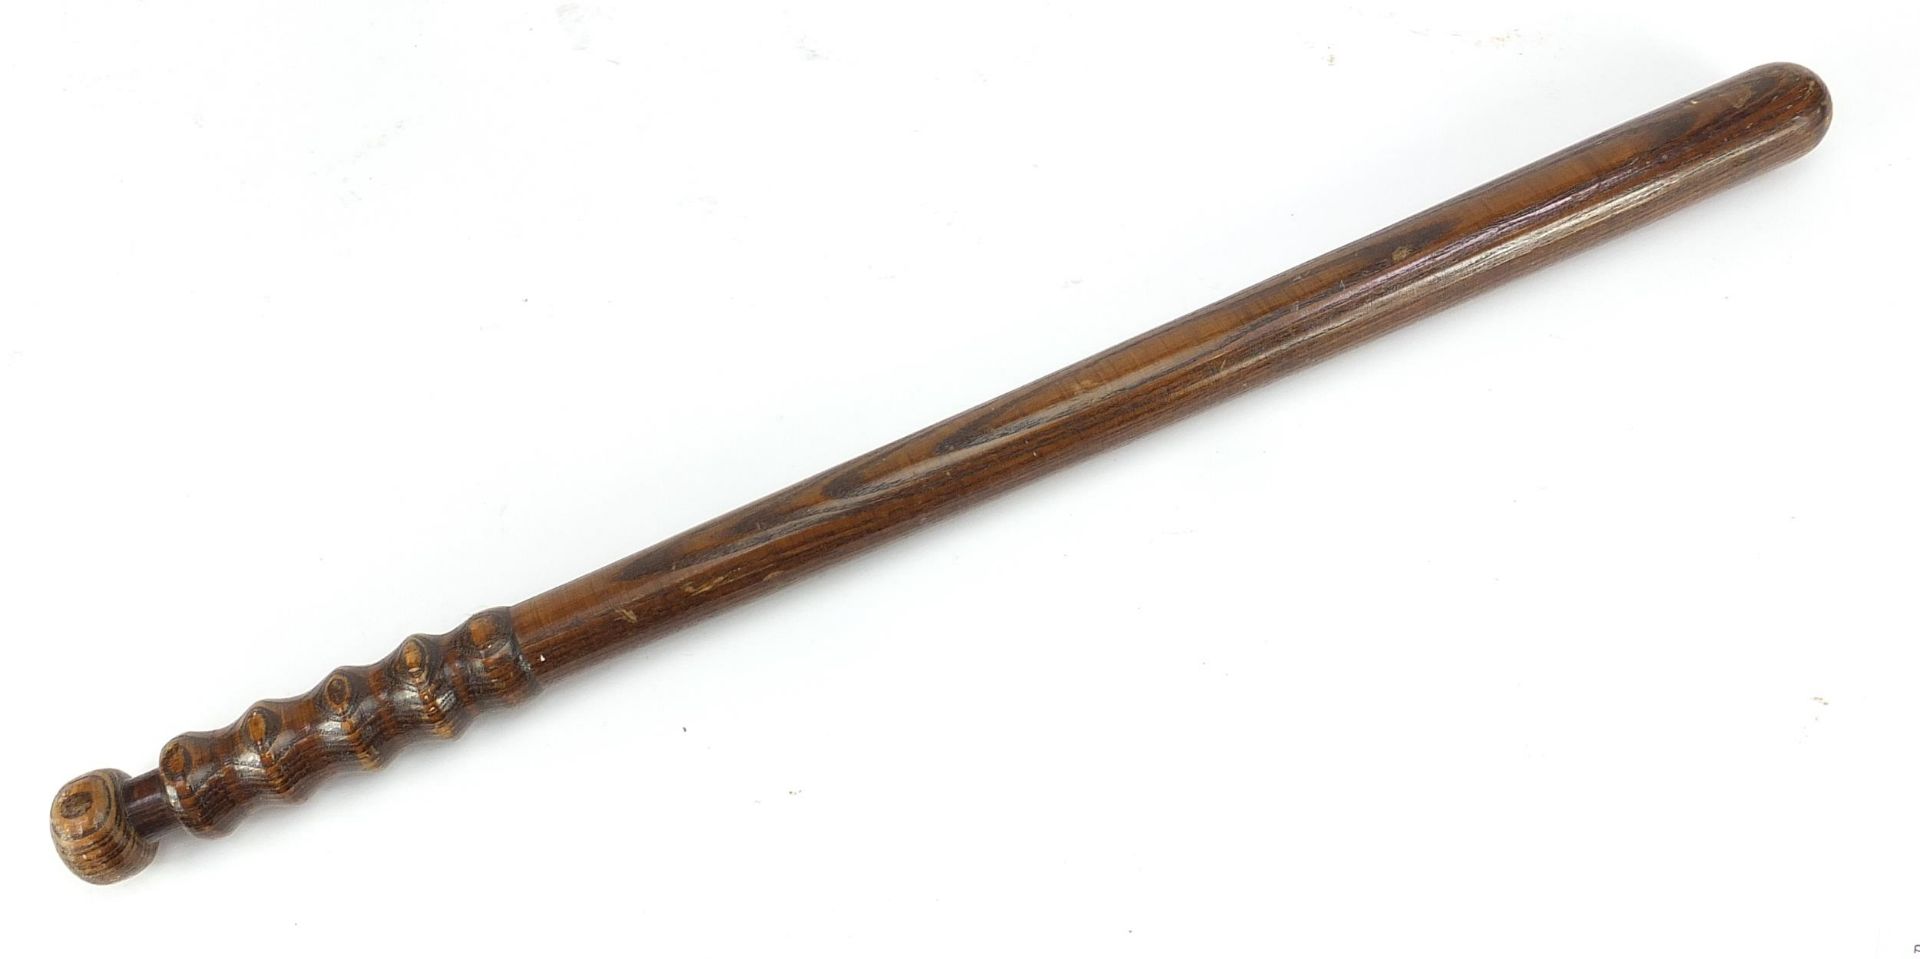 Large turned wood truncheon, 66cm in length - Image 2 of 5